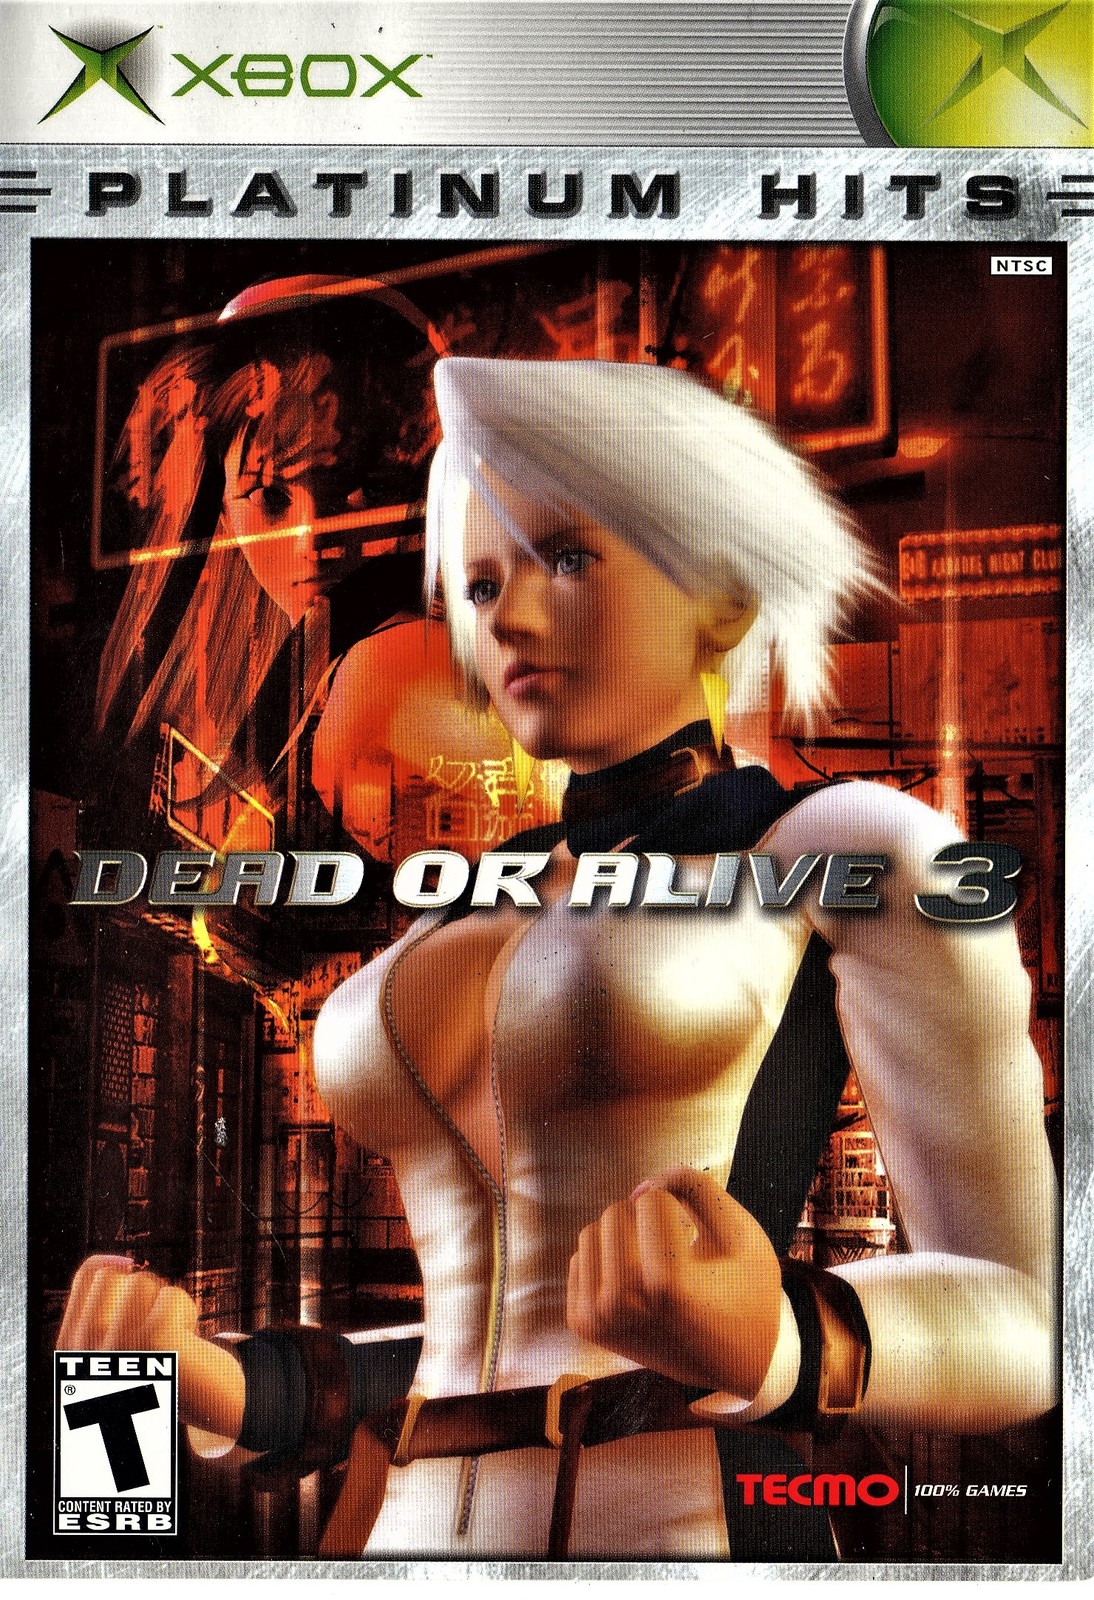 xbox 360 dead or alive 5 download